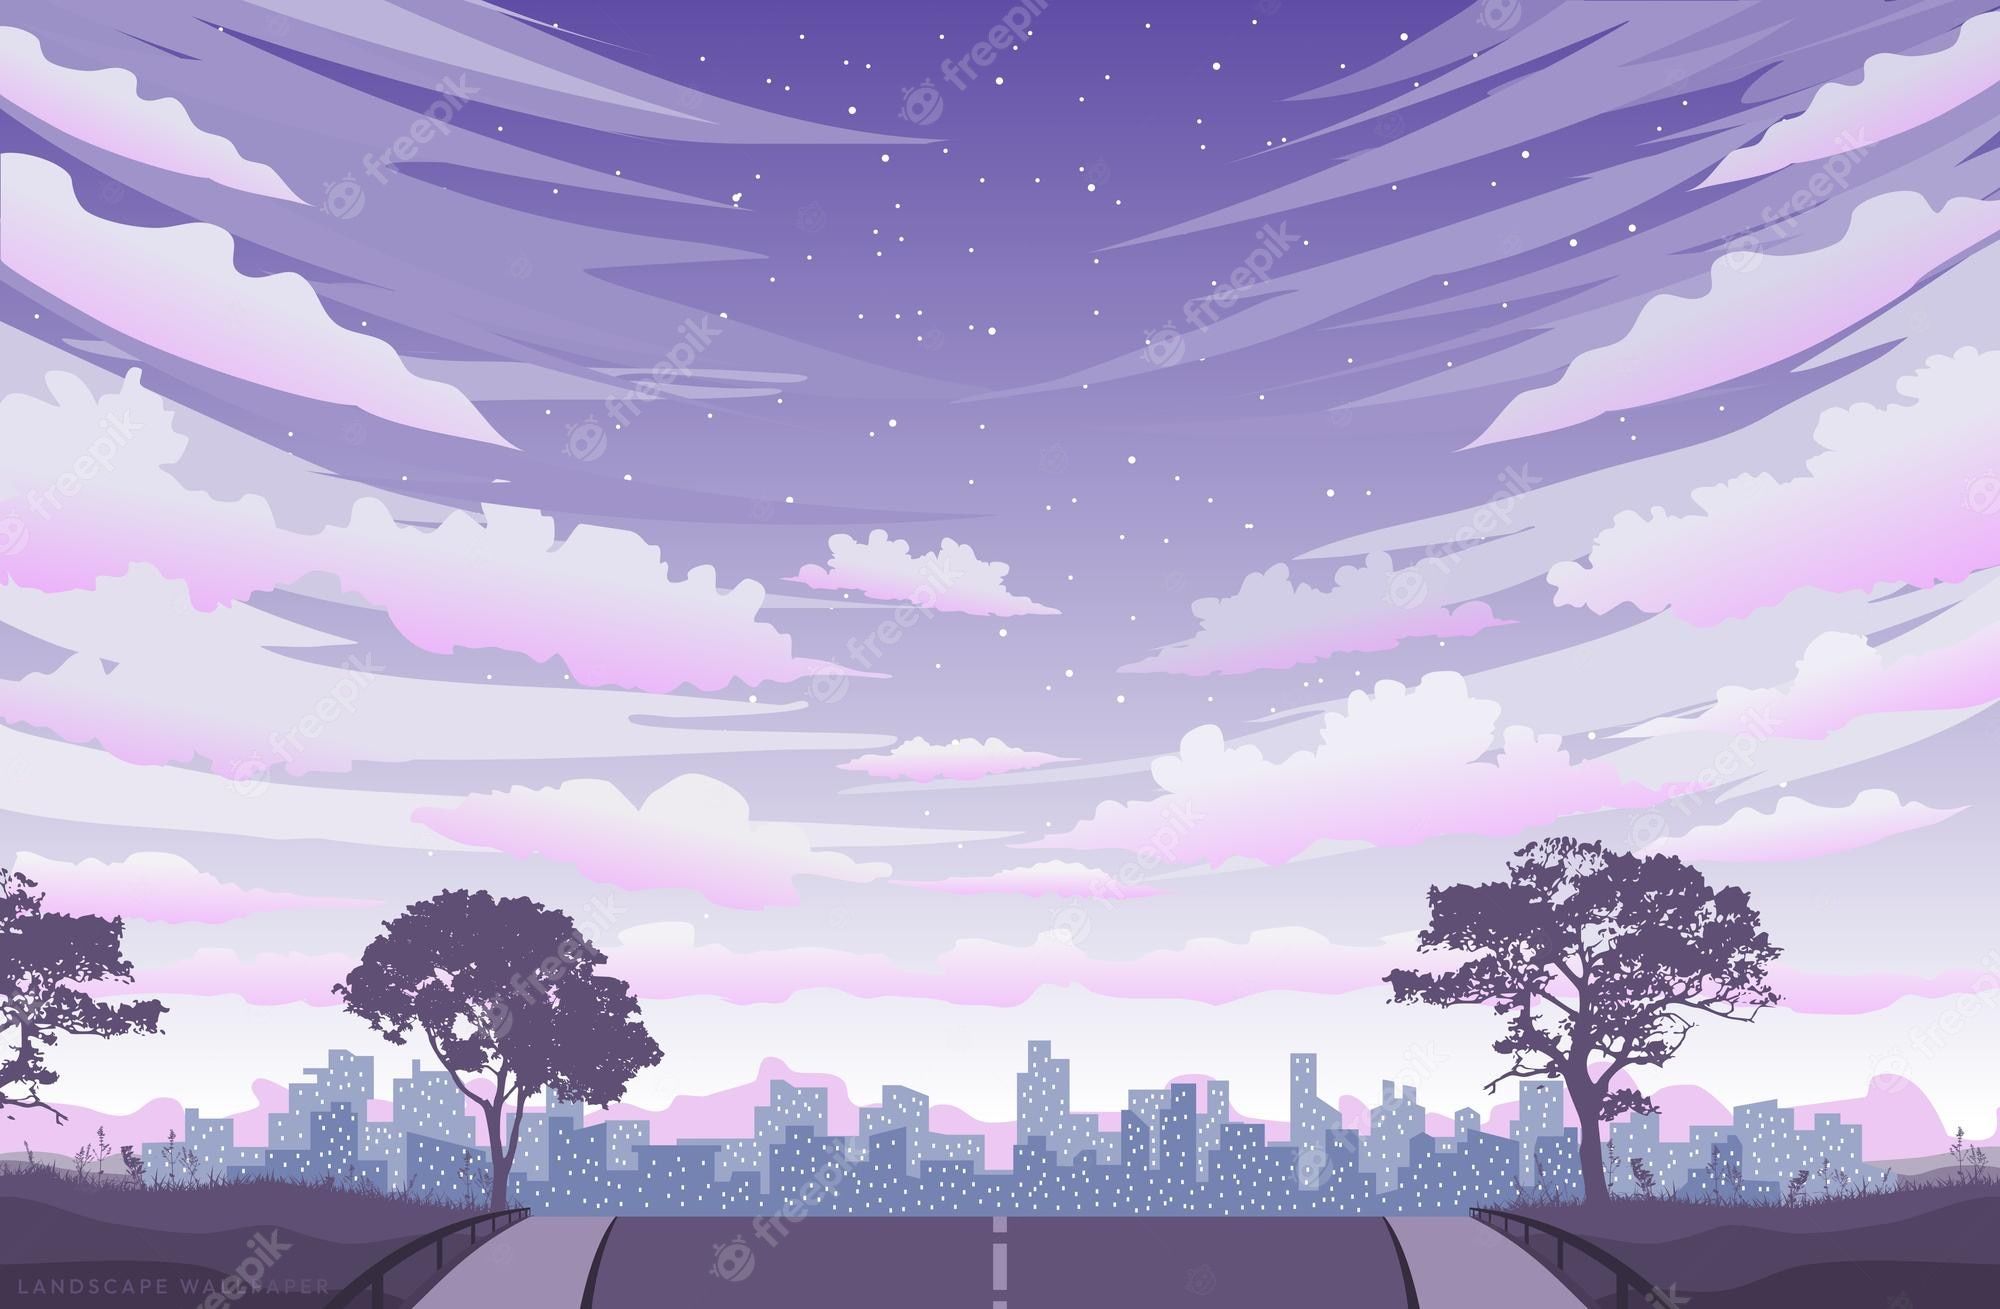 A road in the city with trees and sky - Anime sunset